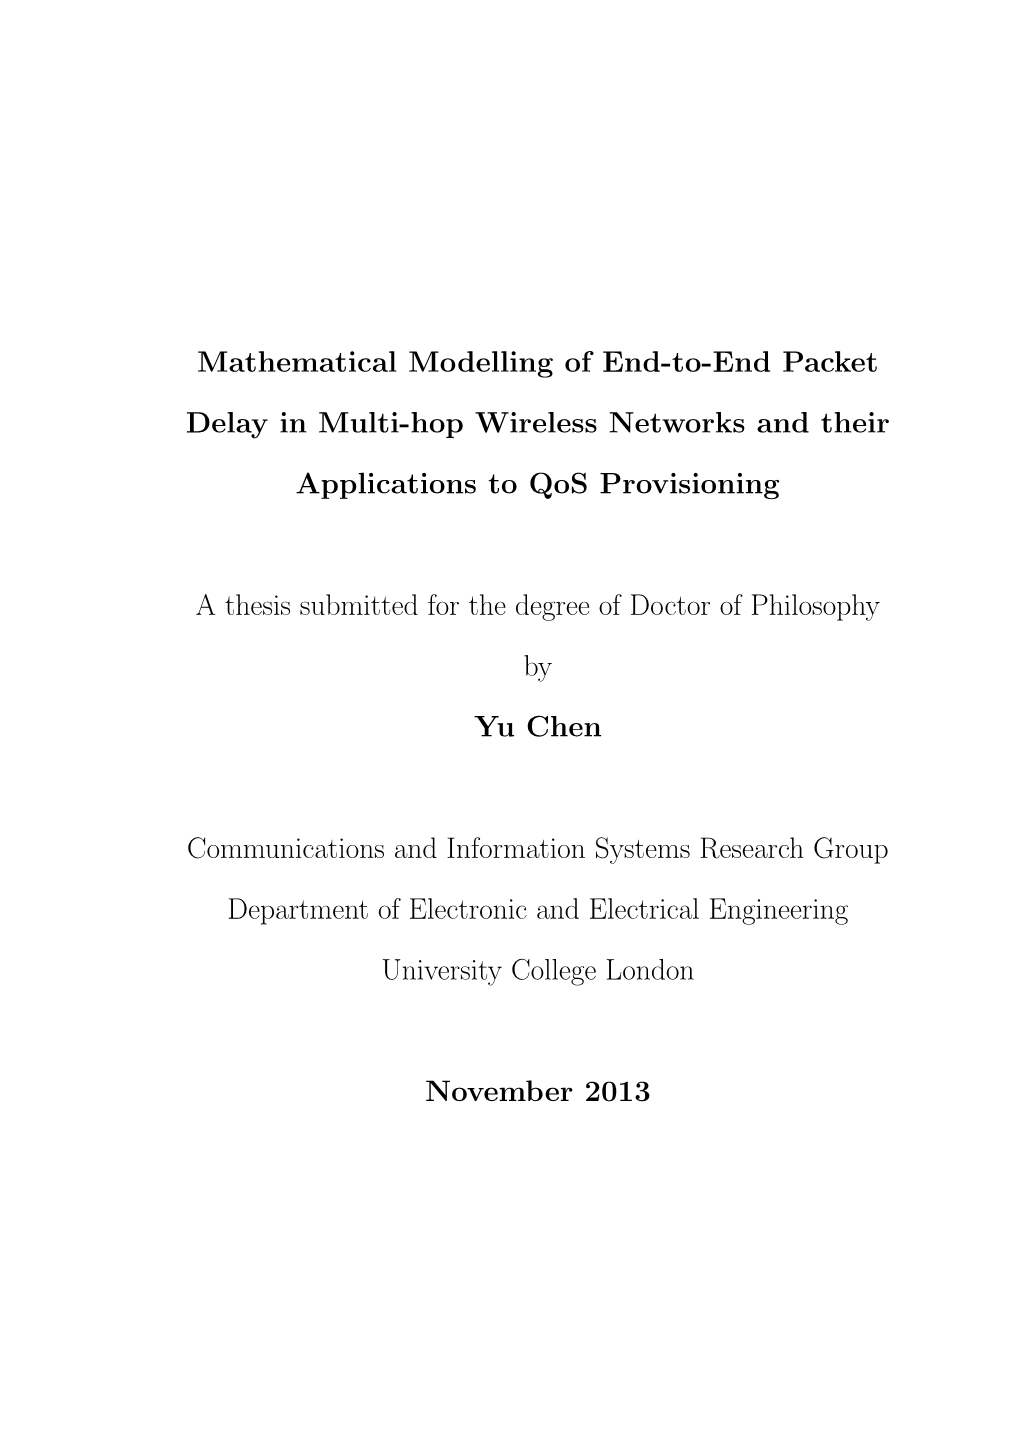 Mathematical Modelling of End-To-End Packet Delay in Multi